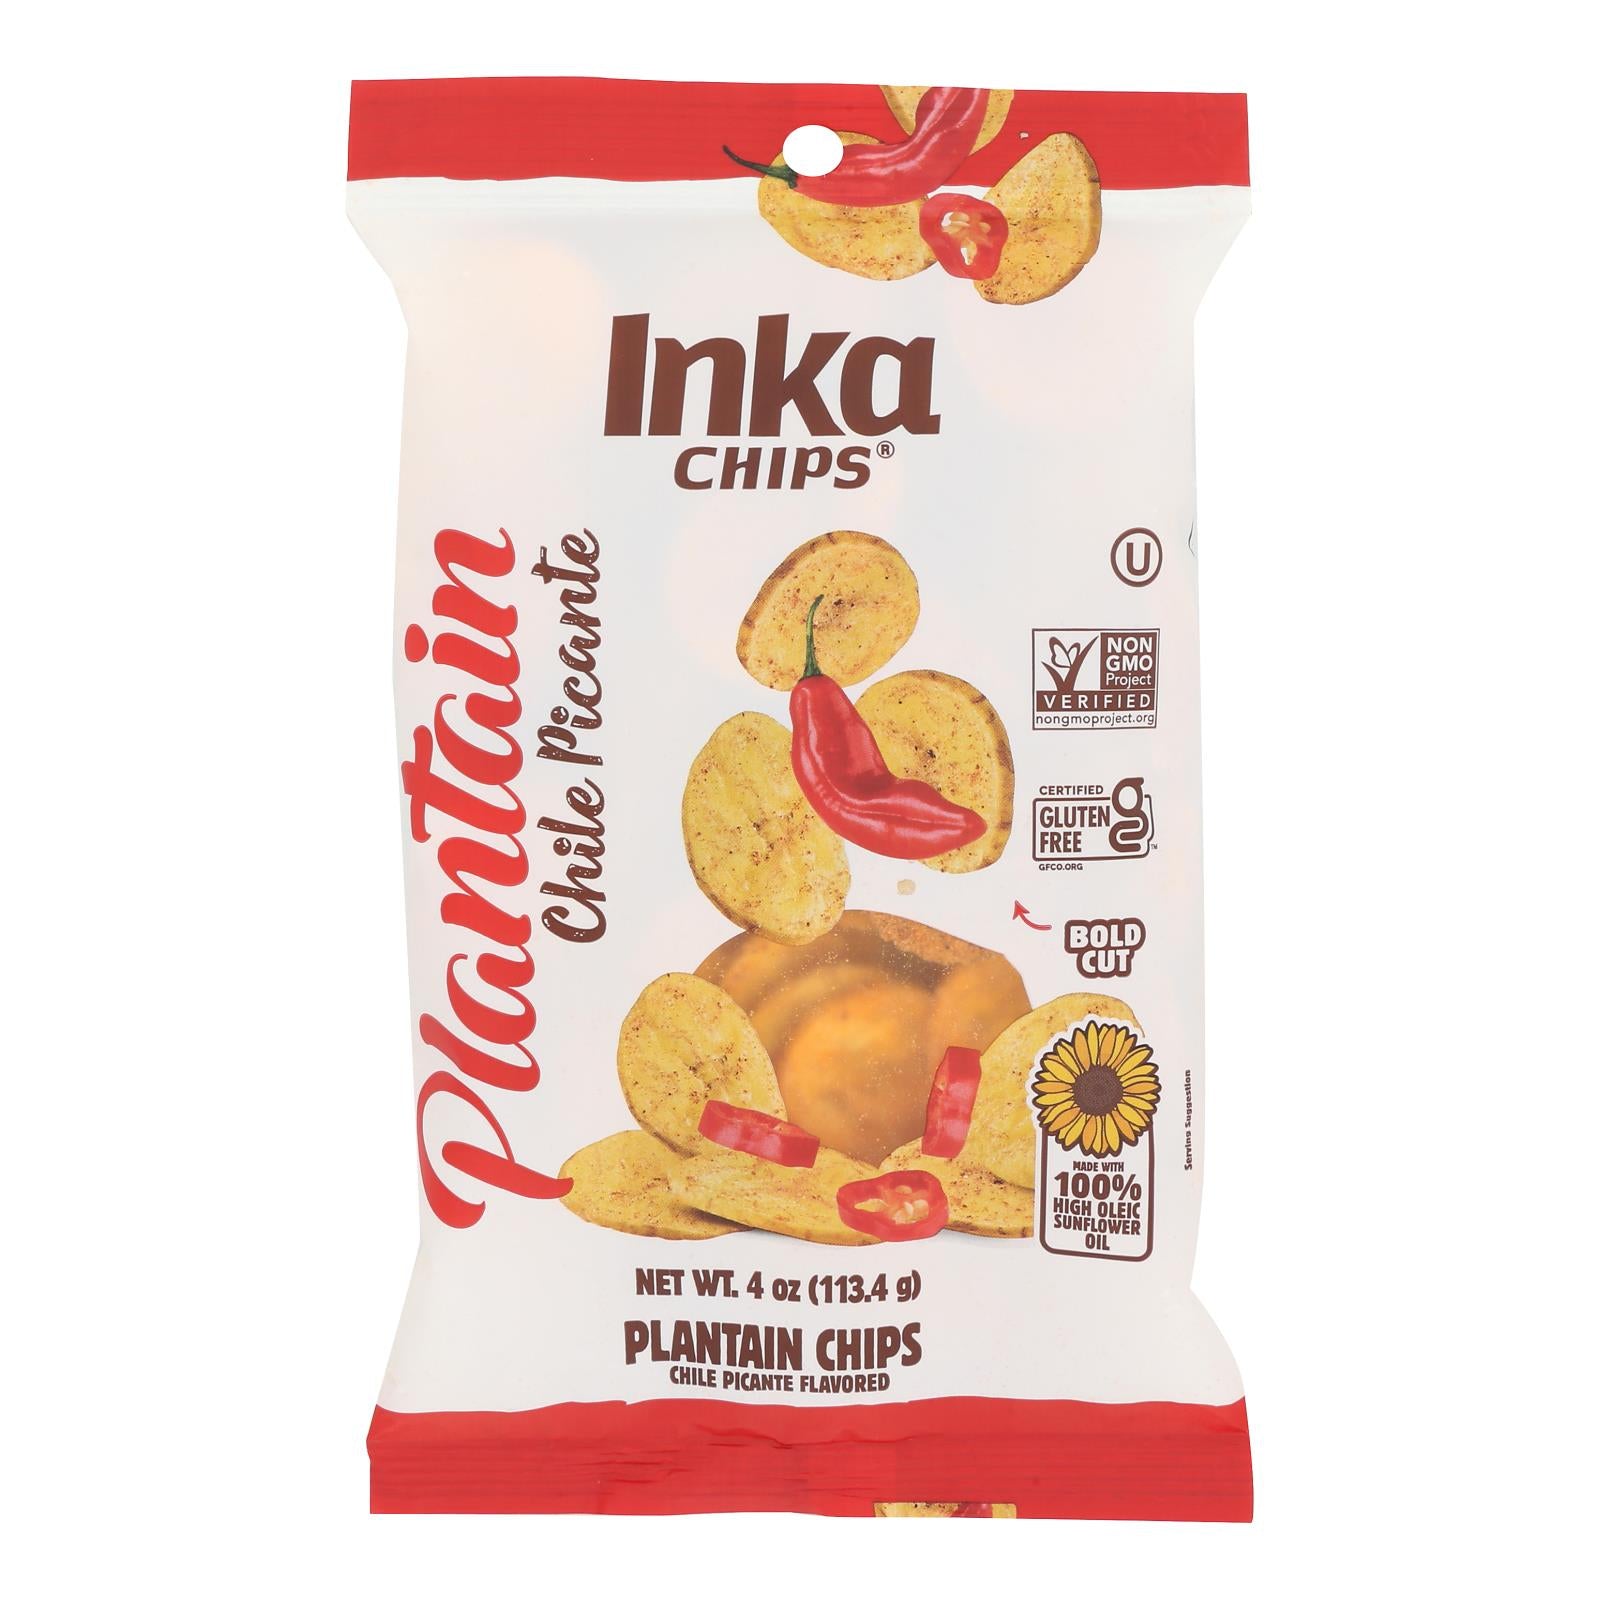 Inka Crops - Plantain Chips - Chile Picante - Case of 12 - 4 oz.